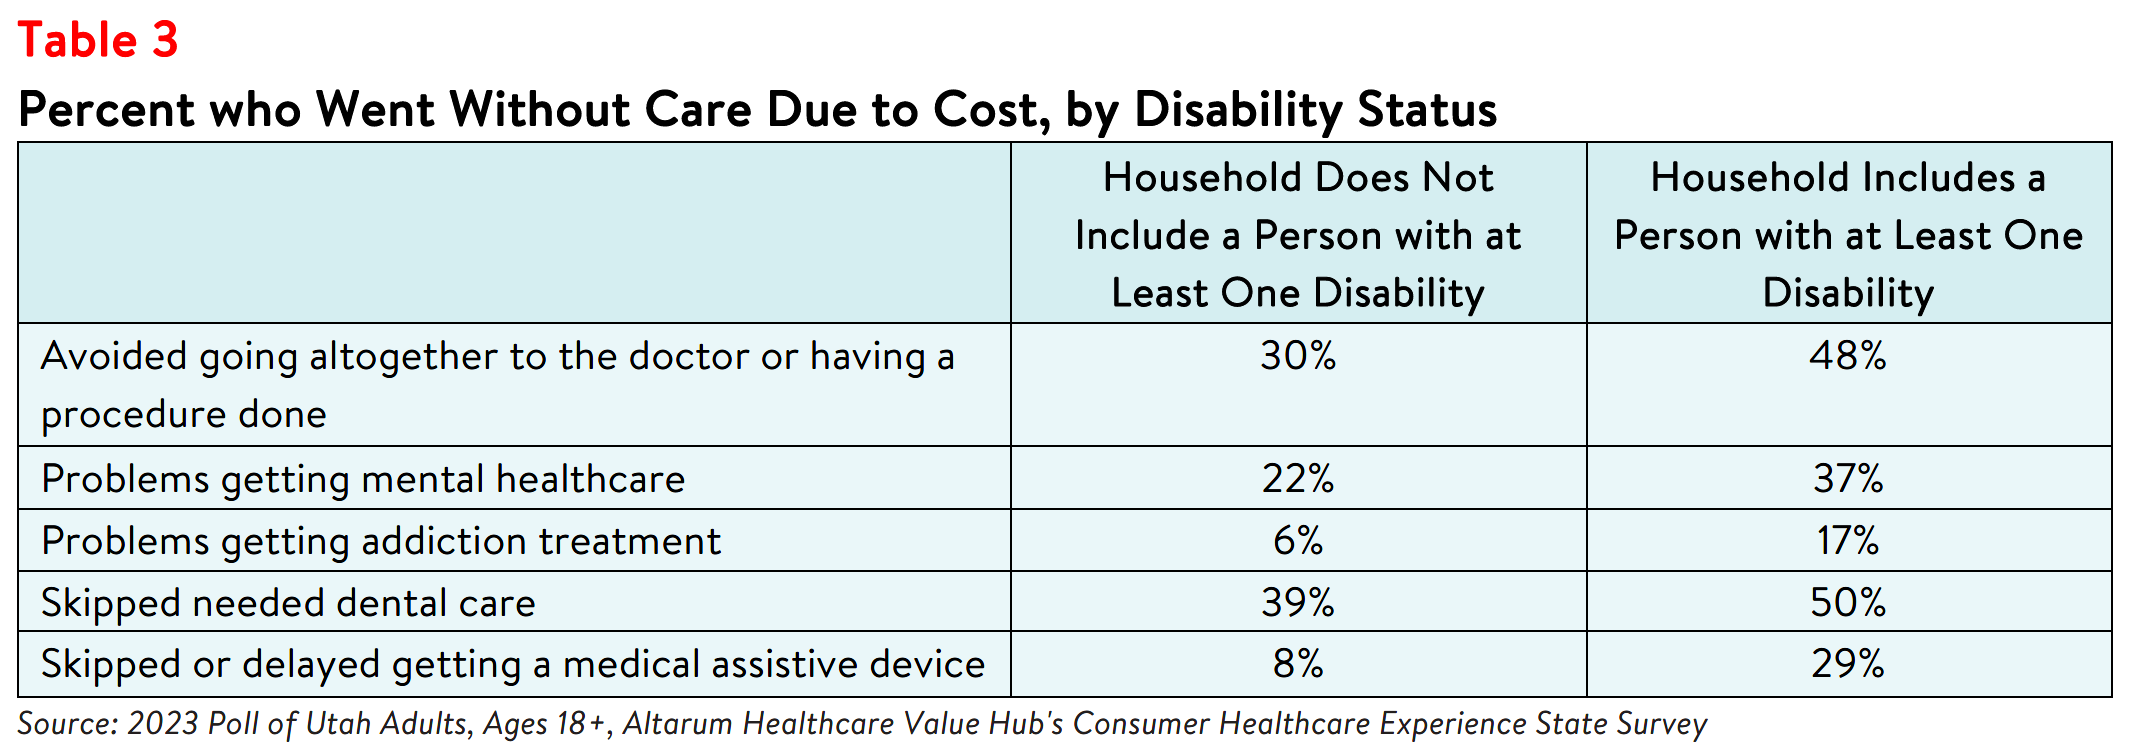 Utah Residents Struggle to Afford High Healthcare Costs_Affordability Table3.png